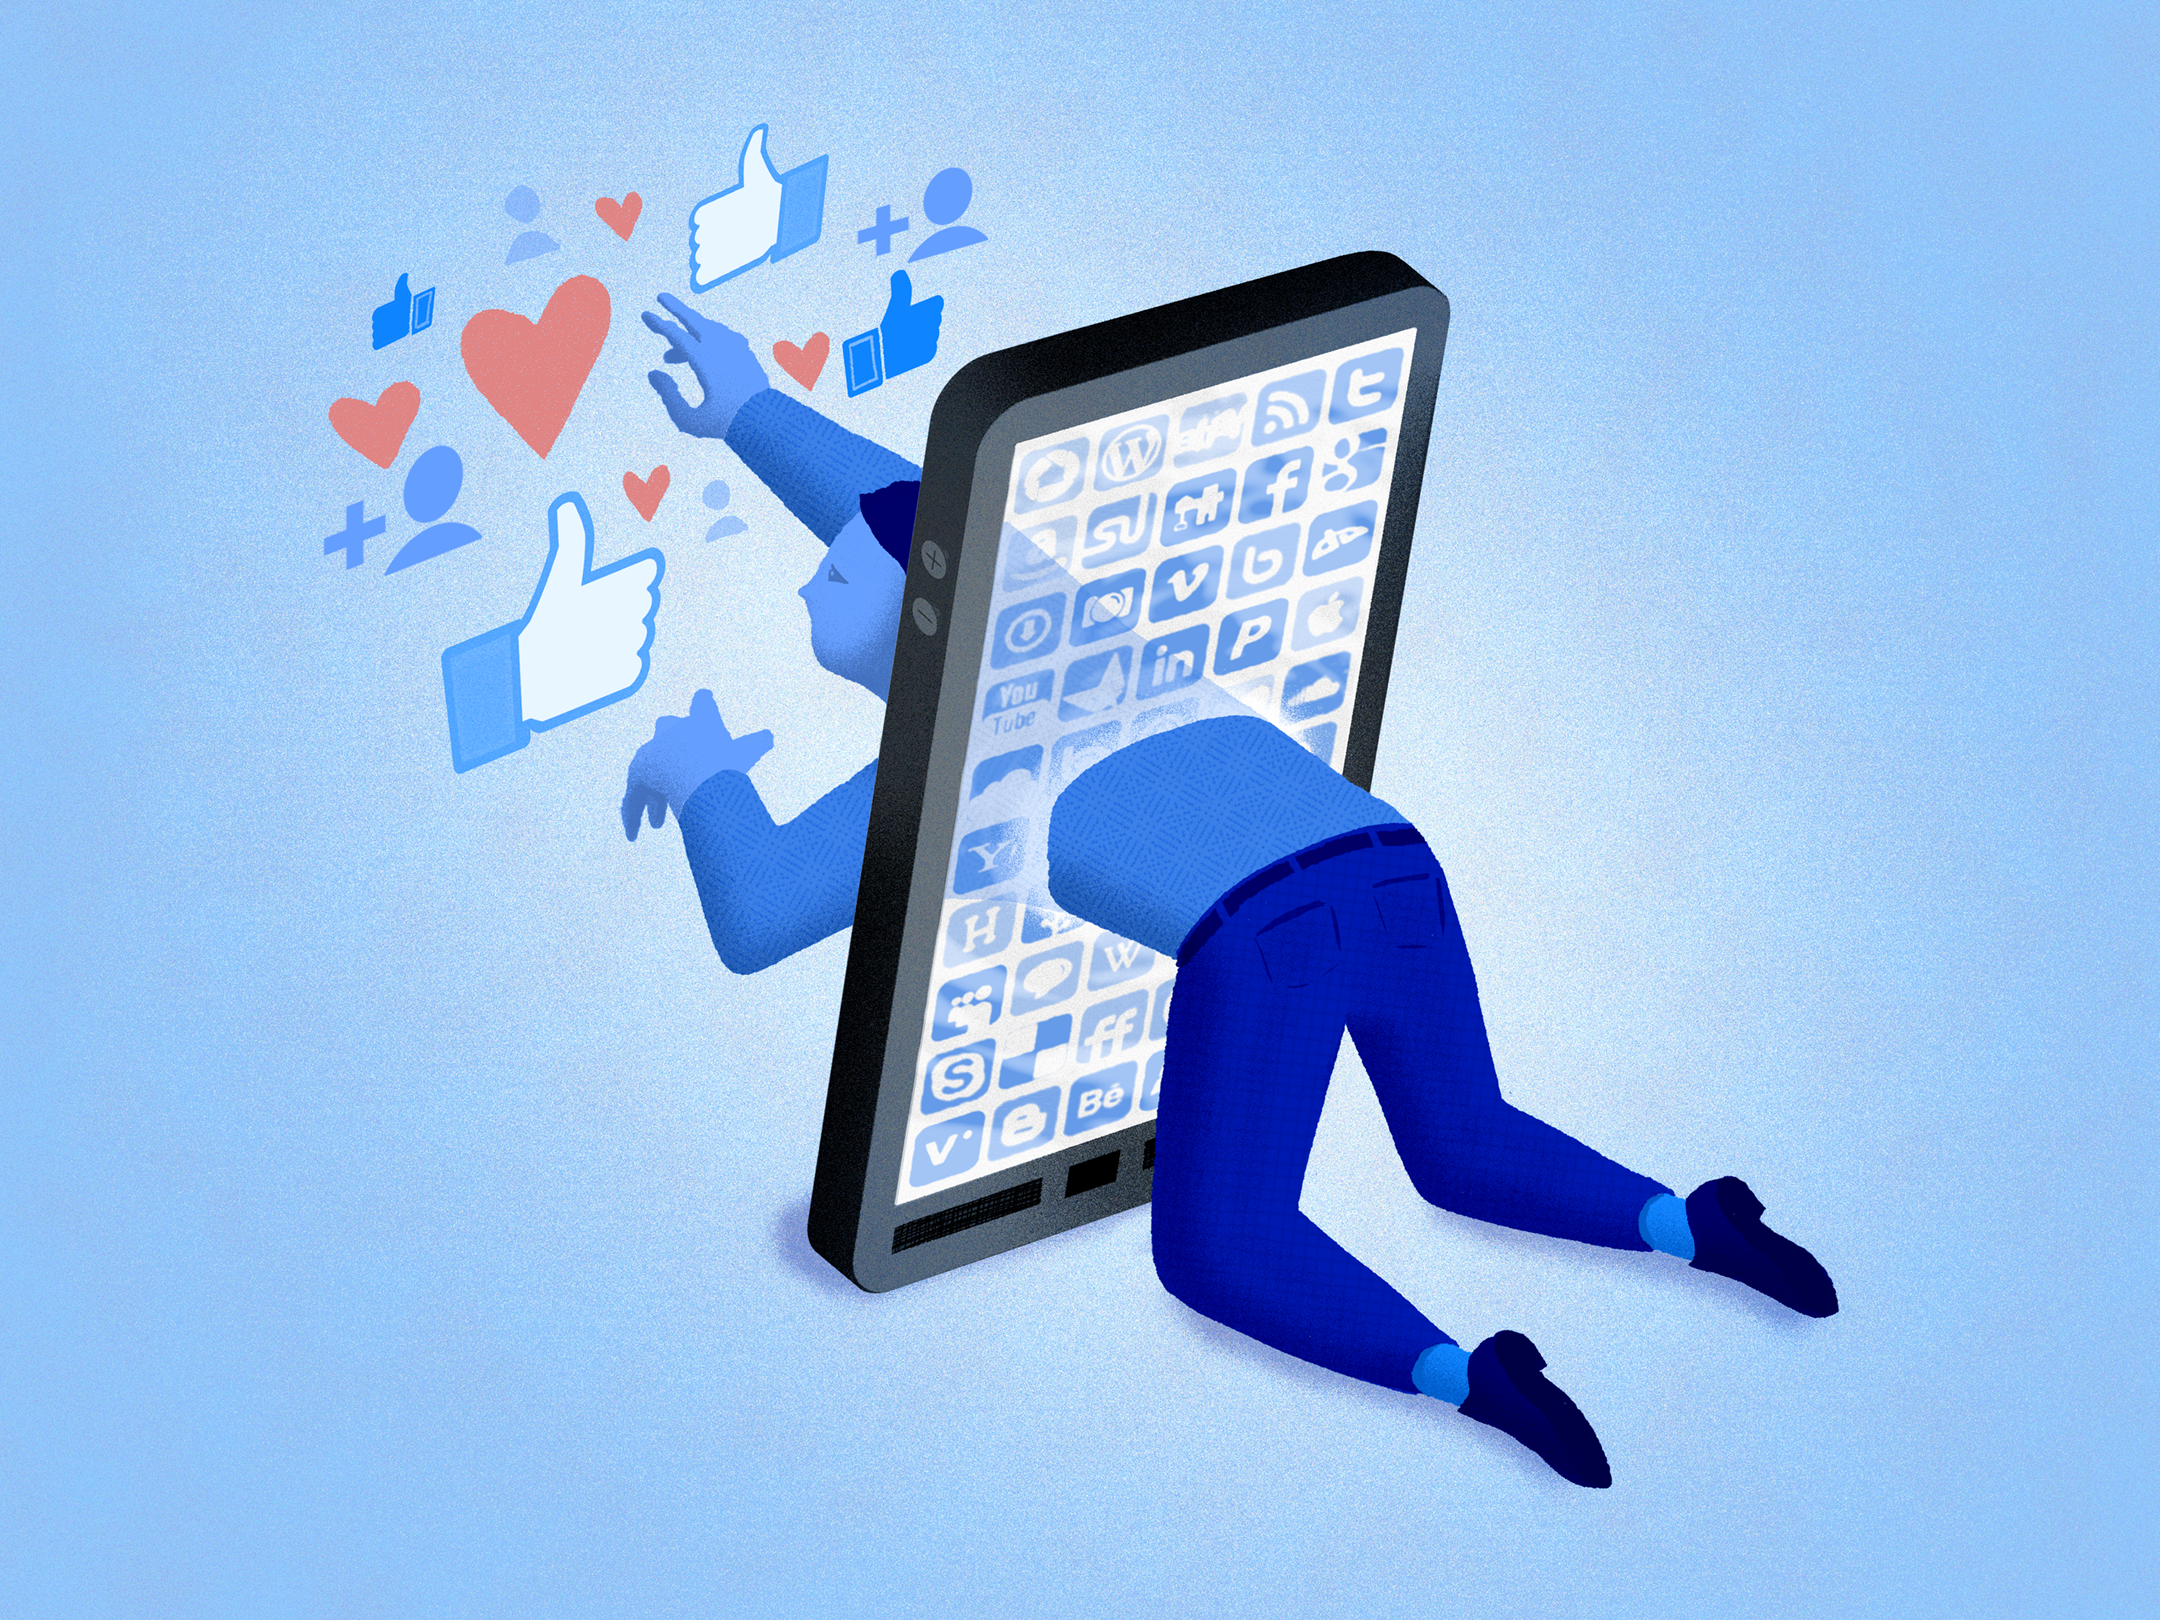 Social Media Is Addictive. Do Regulators Need to Step In? | Yale Insights